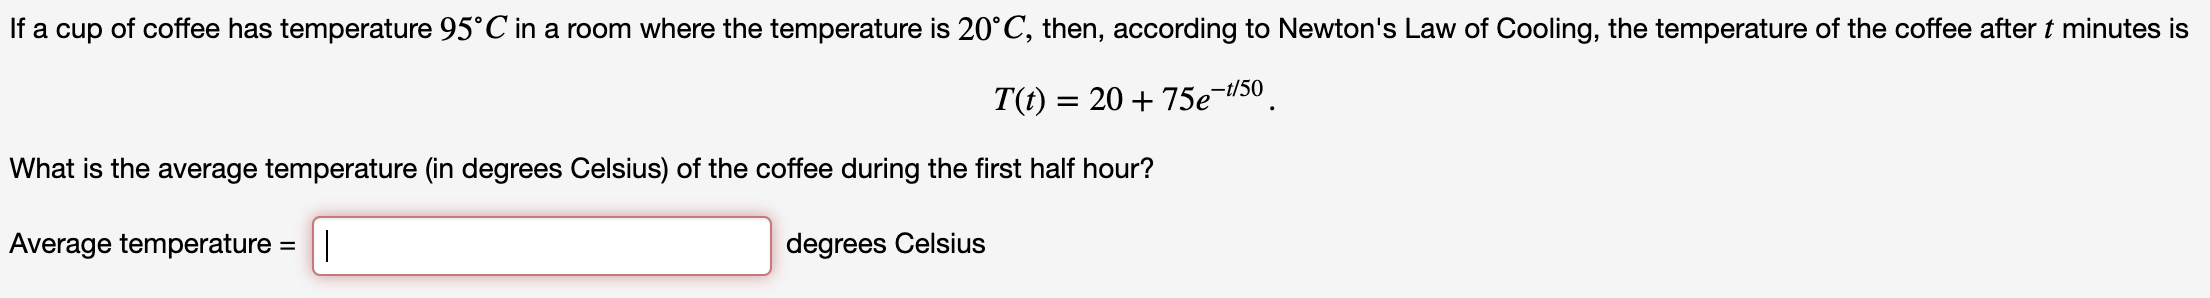 If a cup of coffee has temperature 95°C in a room where the temperature is 20 C, then, according to Newton's Law of Cooling, the temperature of the coffee after t minutes is
T(f) = 20 +75e-50
What is the average temperature (in degrees Celsius) of the coffee during the first half hour?
Average temperature = |
degrees Celsius
